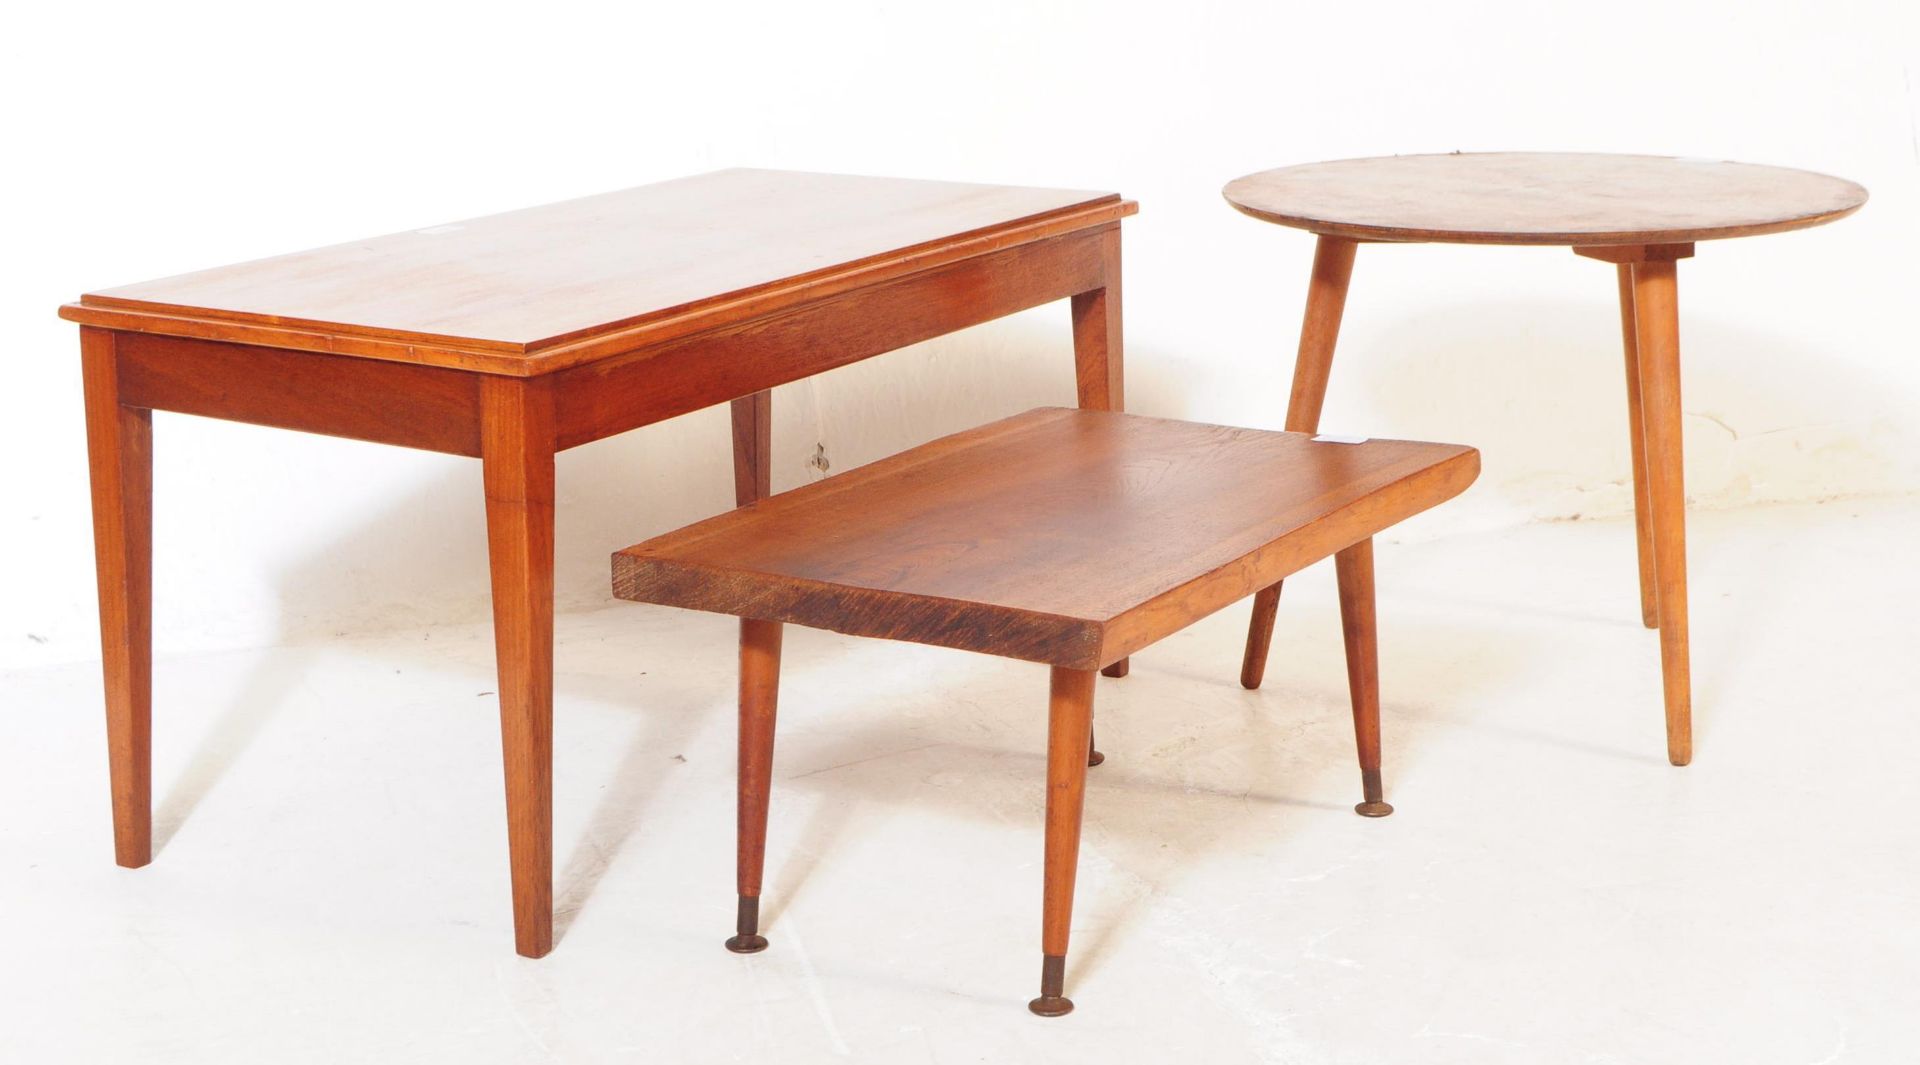 BRITISH MODERN DESIGN - COLLECTION OF THREE TABLES